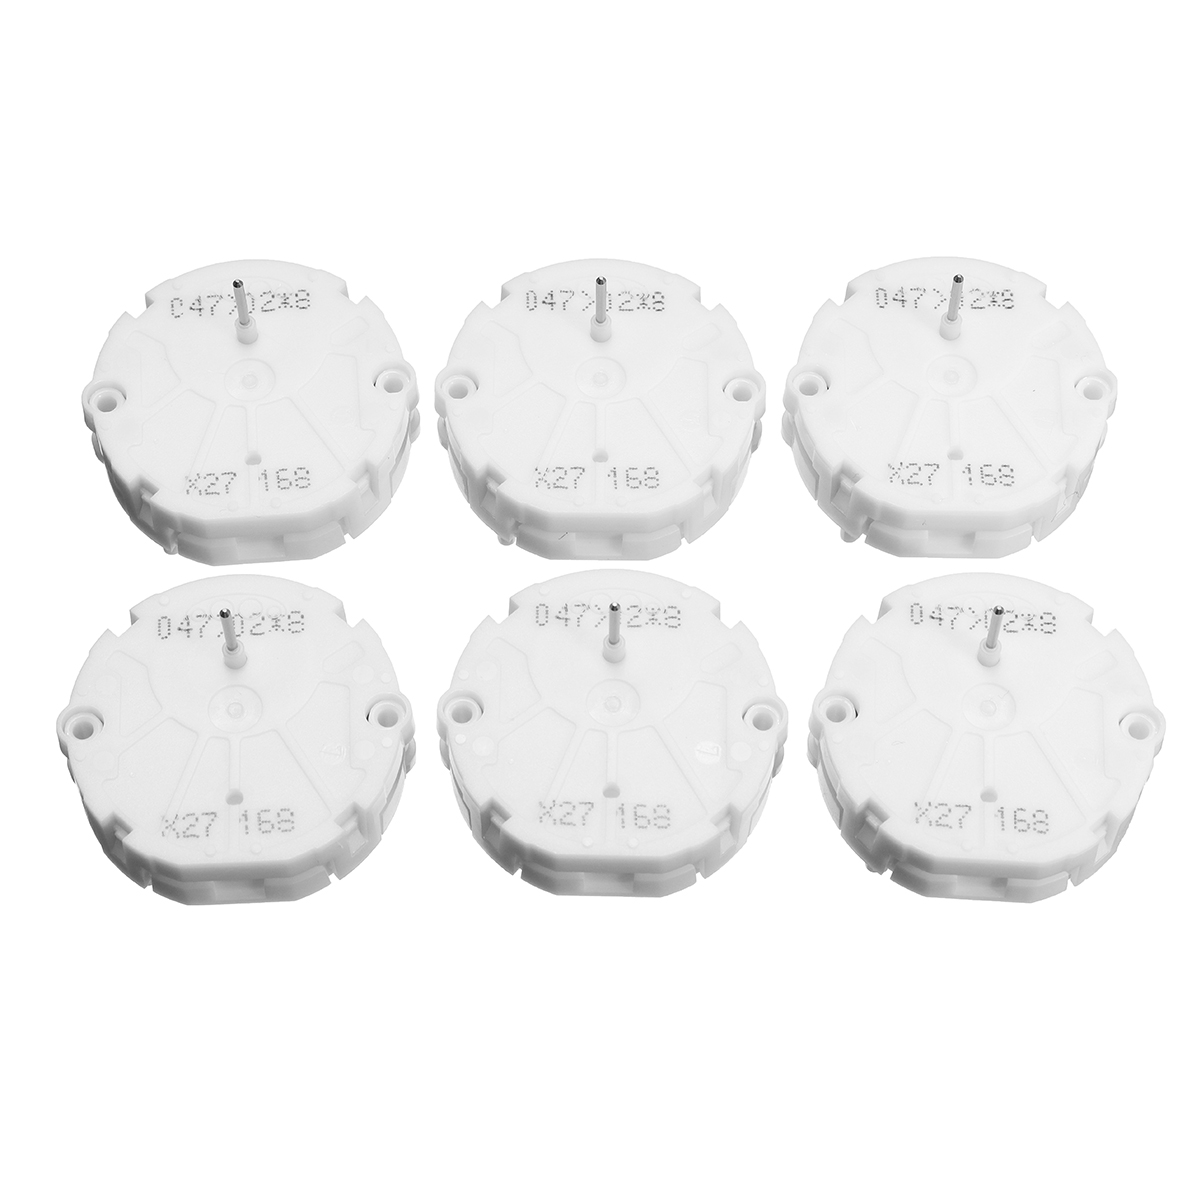 6-X27-168-Speedometer-Cluster-Repair-Kit-GMC-Stepper-Motor-Soldering-Accessories-with-11-LED-Bulds-1284858-7